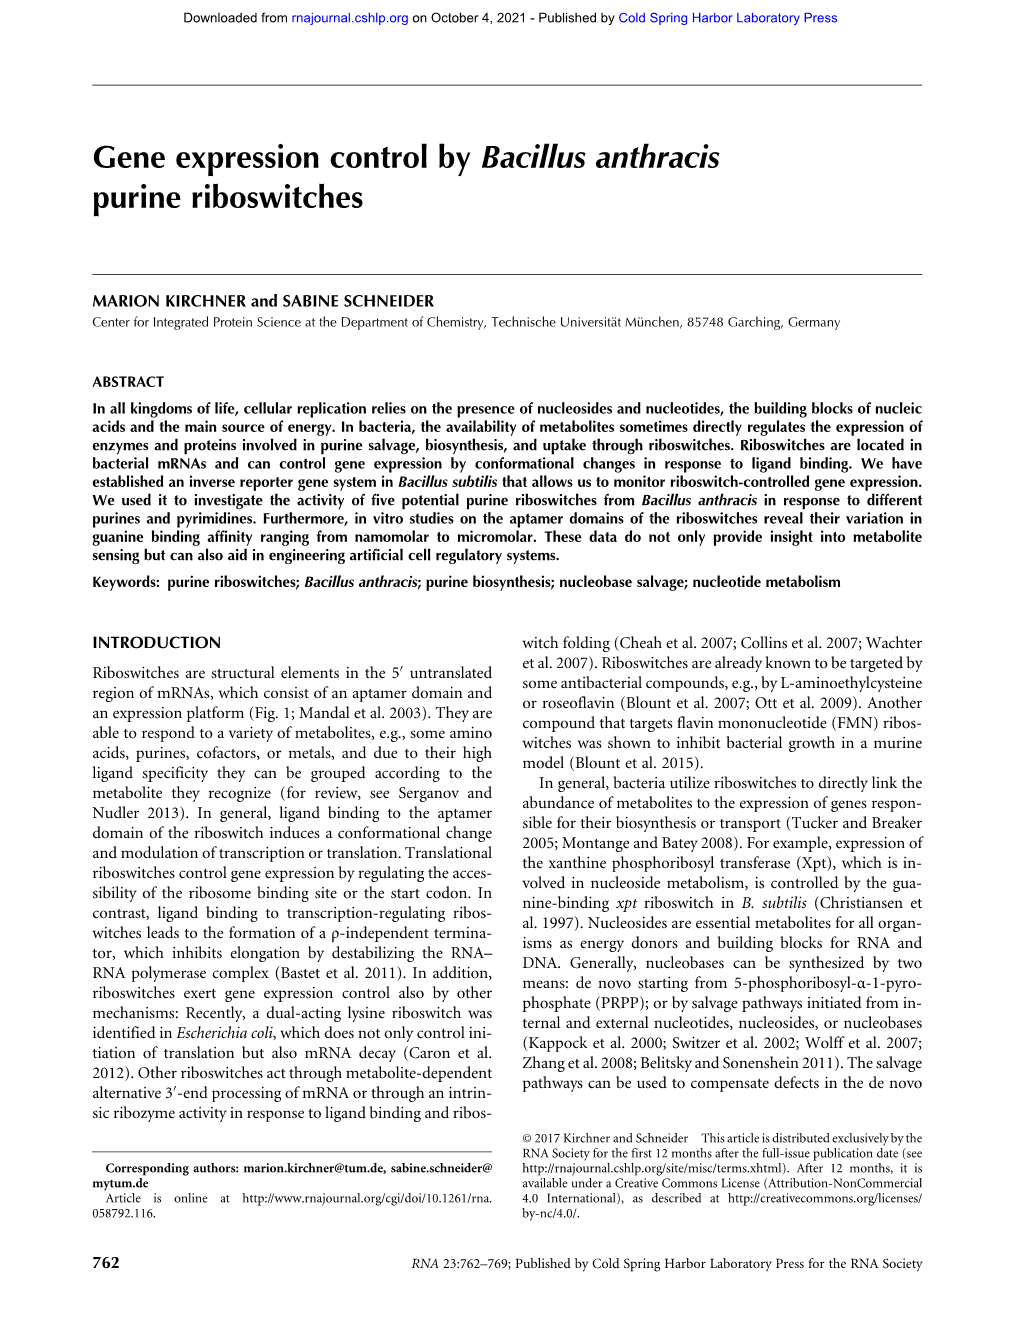 Gene Expression Control by Bacillus Anthracis Purine Riboswitches